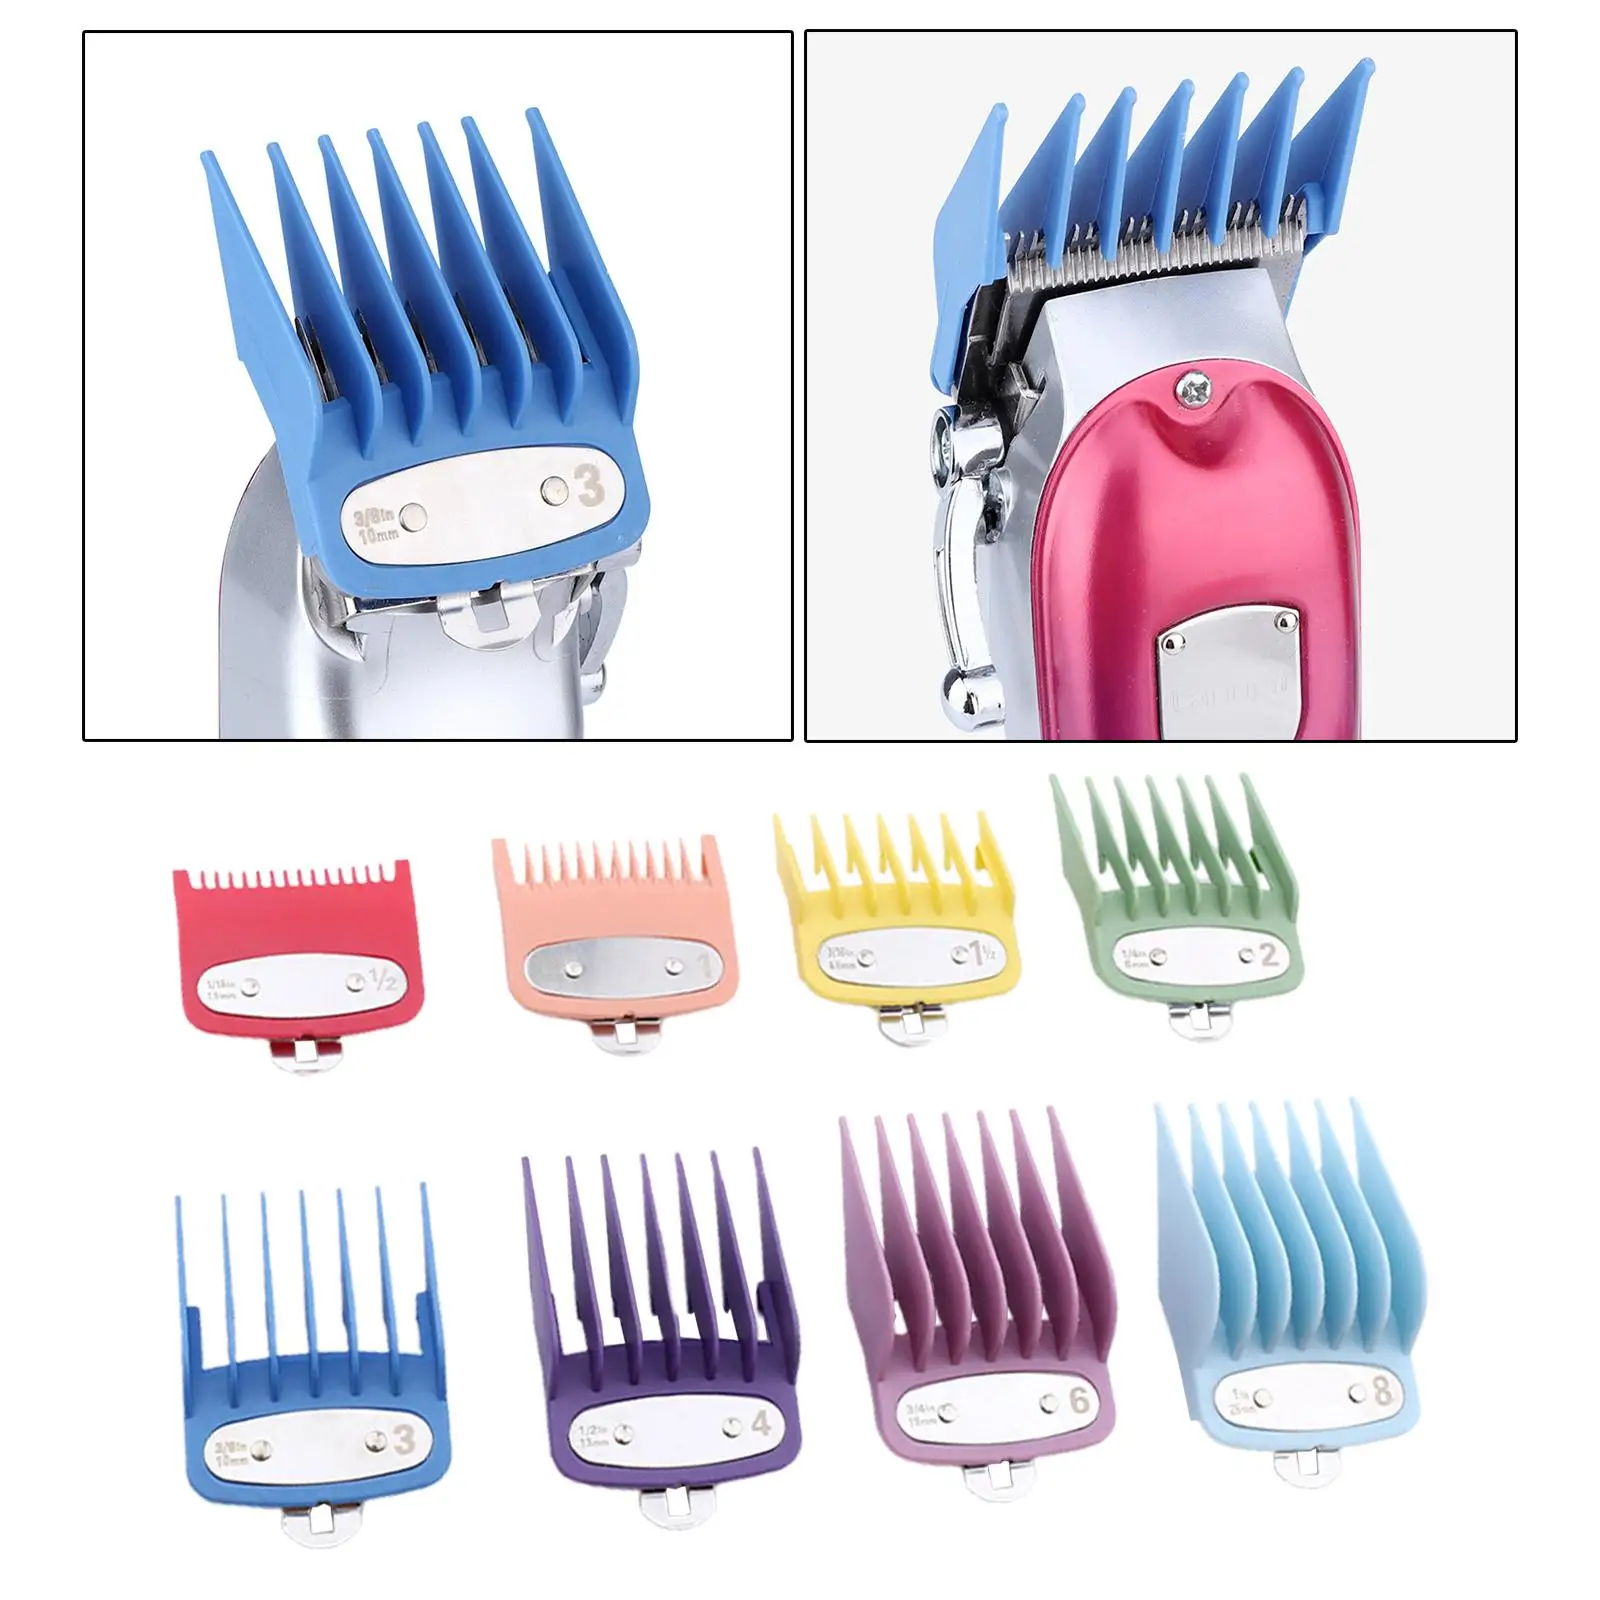 

8 Pieces Hair Clipper Guards with Metal Clip Replacement from 1/16 inch to 1inch Guide Combs for Wahl Clippers Trimmers Barber